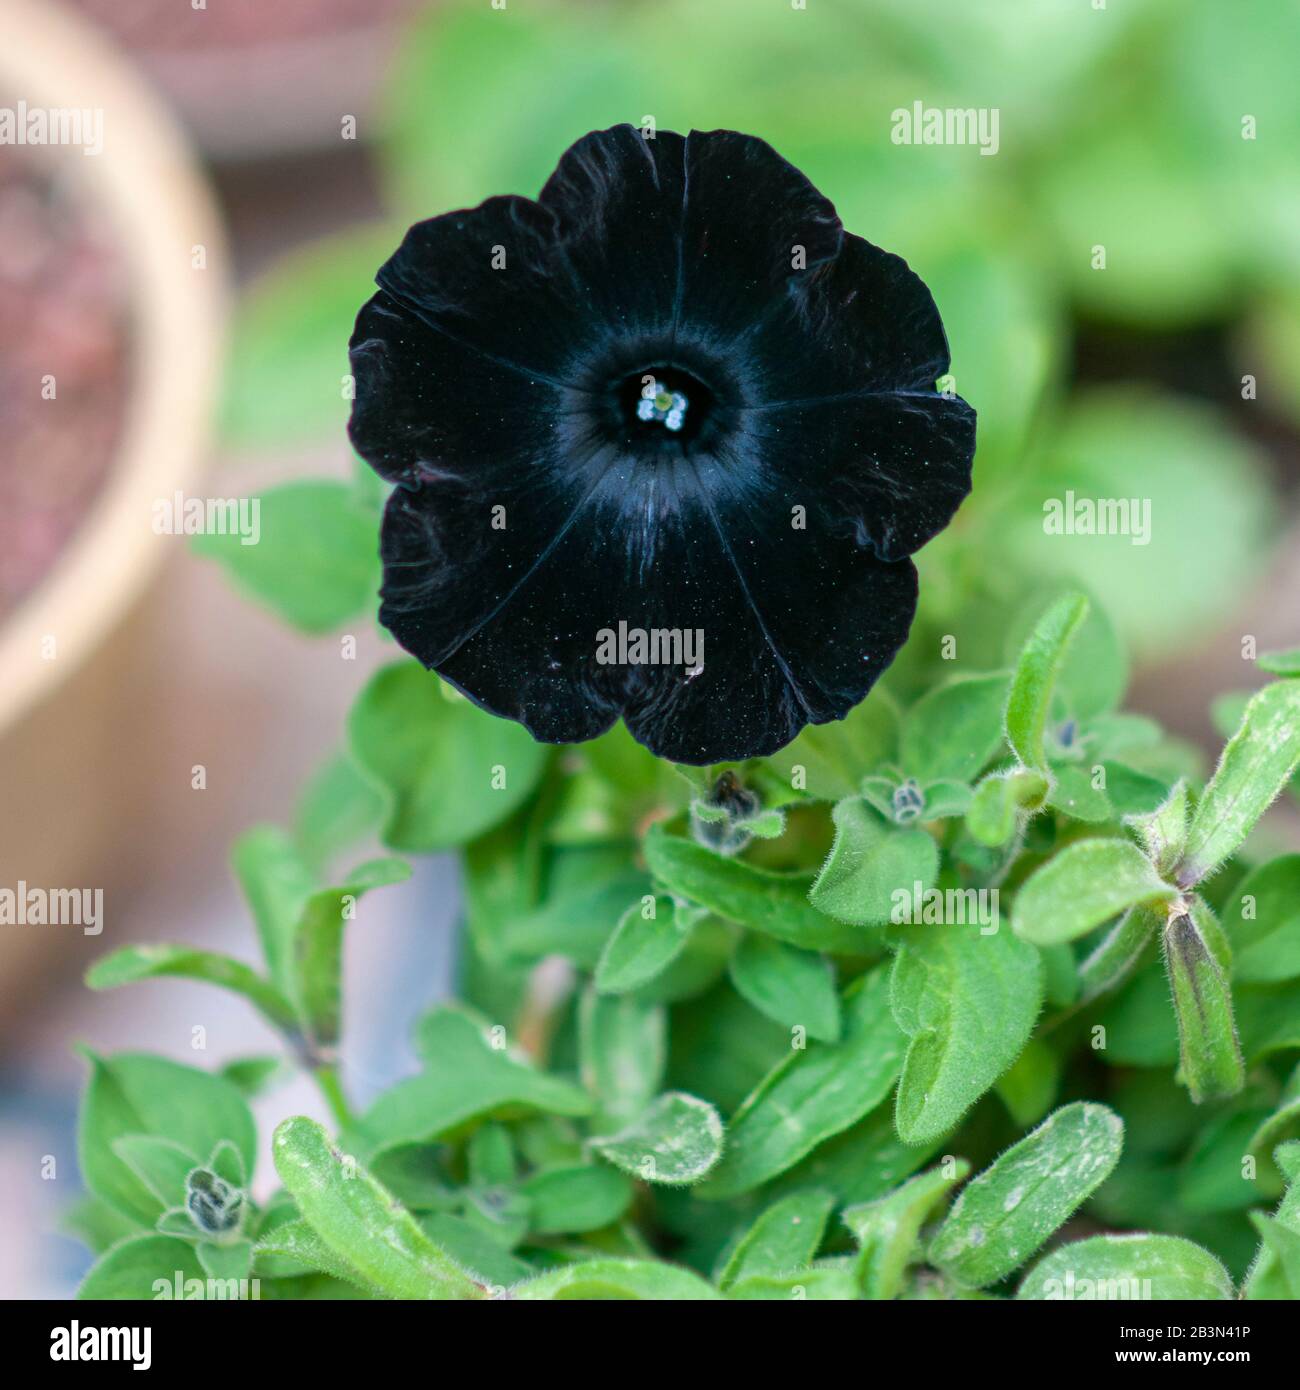 Close up of a single blooming black flower of the Black Velvet Petunia plant. Photographed in Israel in February Stock Photo